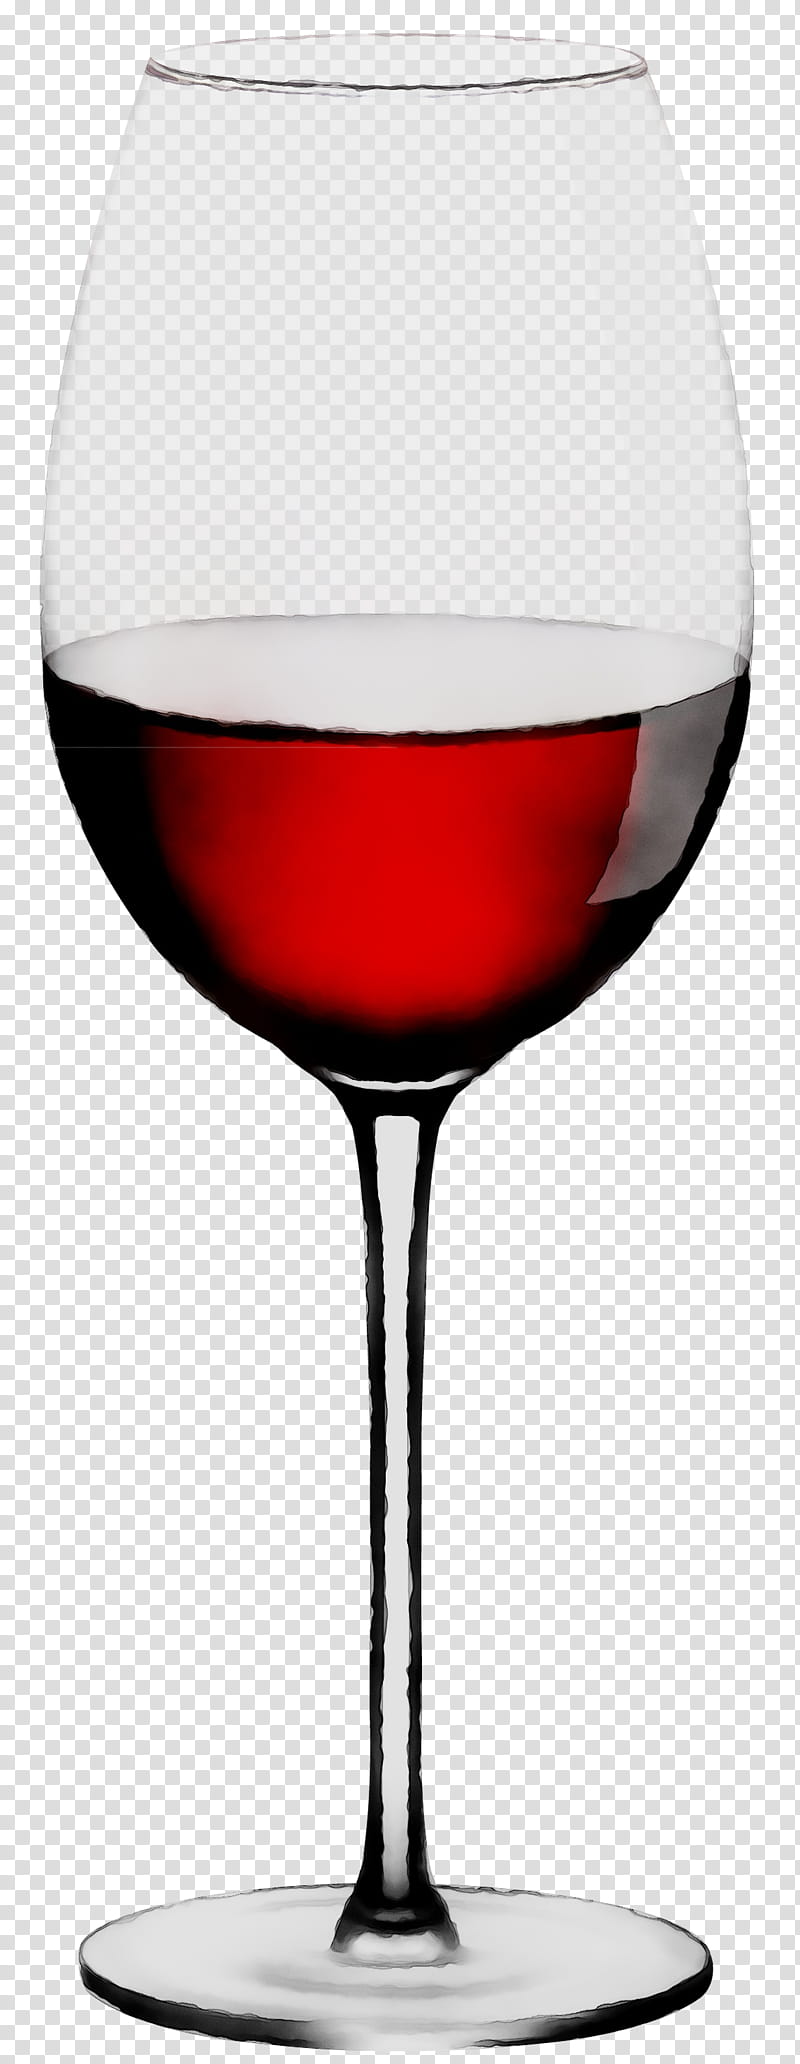 Champagne Bottle, Wine Glass, Red Wine, White Wine, Mulled Wine, Wine Cocktail, Champagne Glass, Cup transparent background PNG clipart